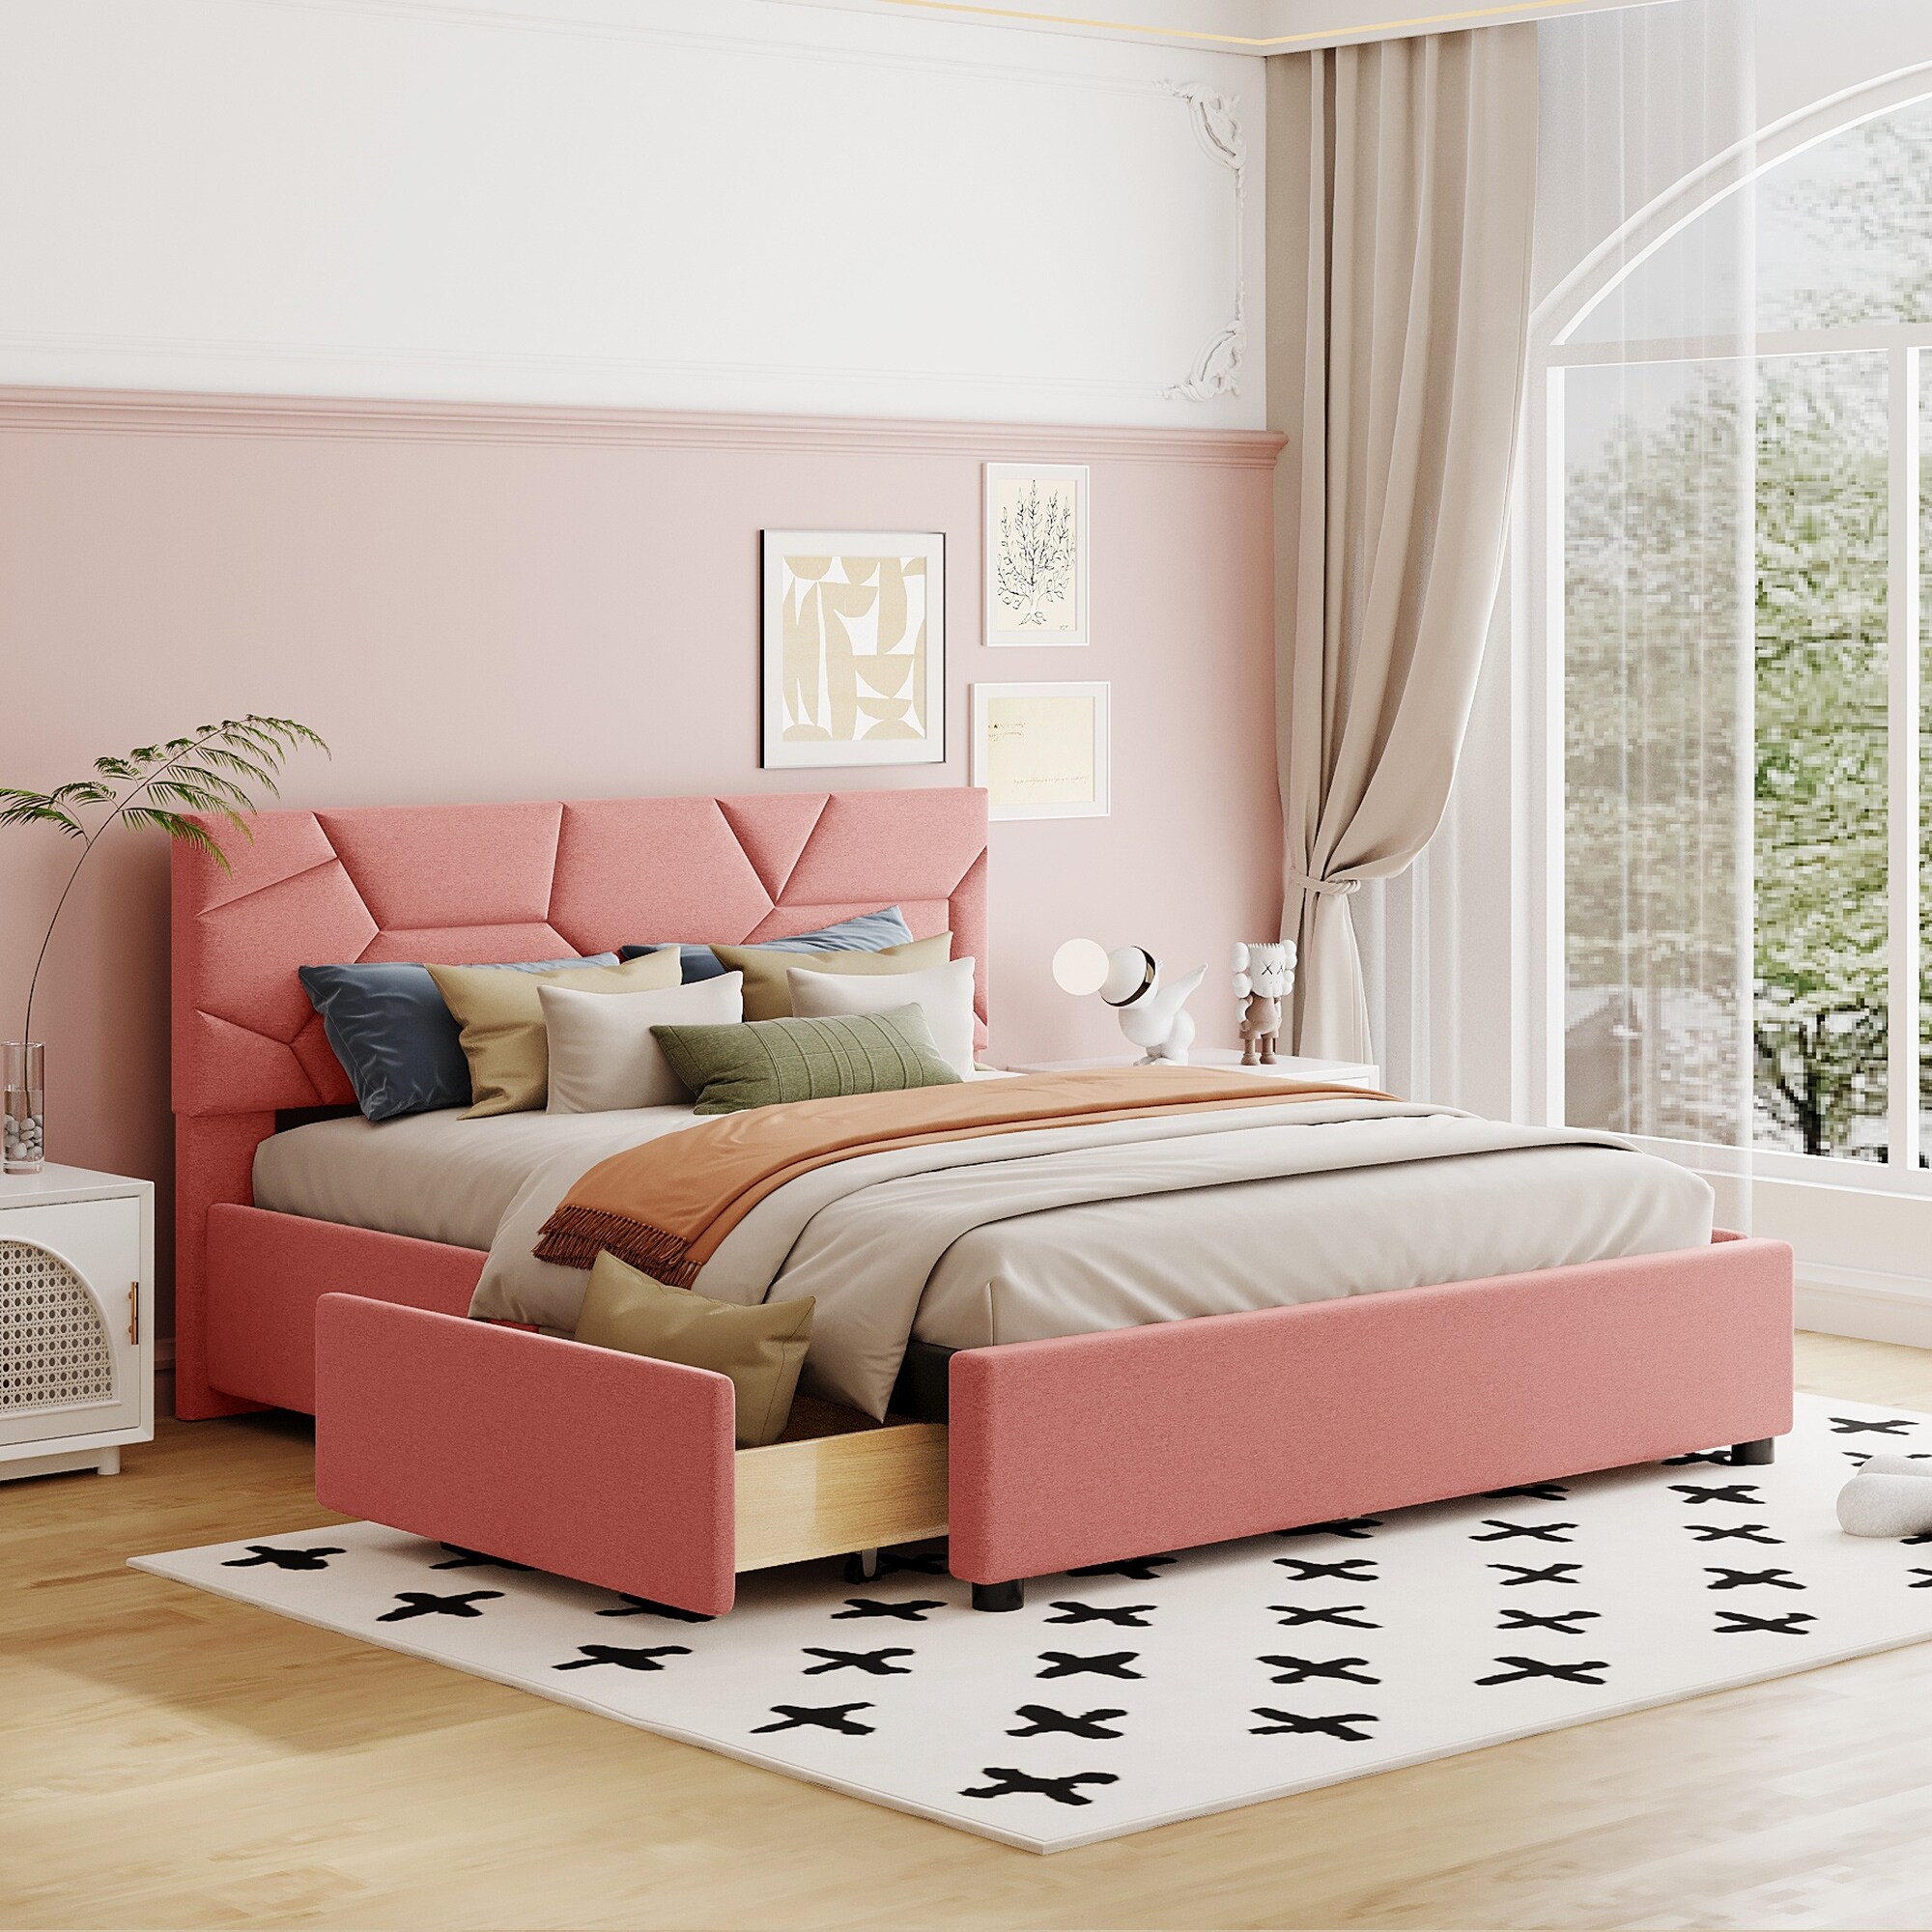 Plywood and Mdf Storage Bed Queen Linen Upholstered Platform Bed With Geometric Pattern Headboard And 4 Side Drawers